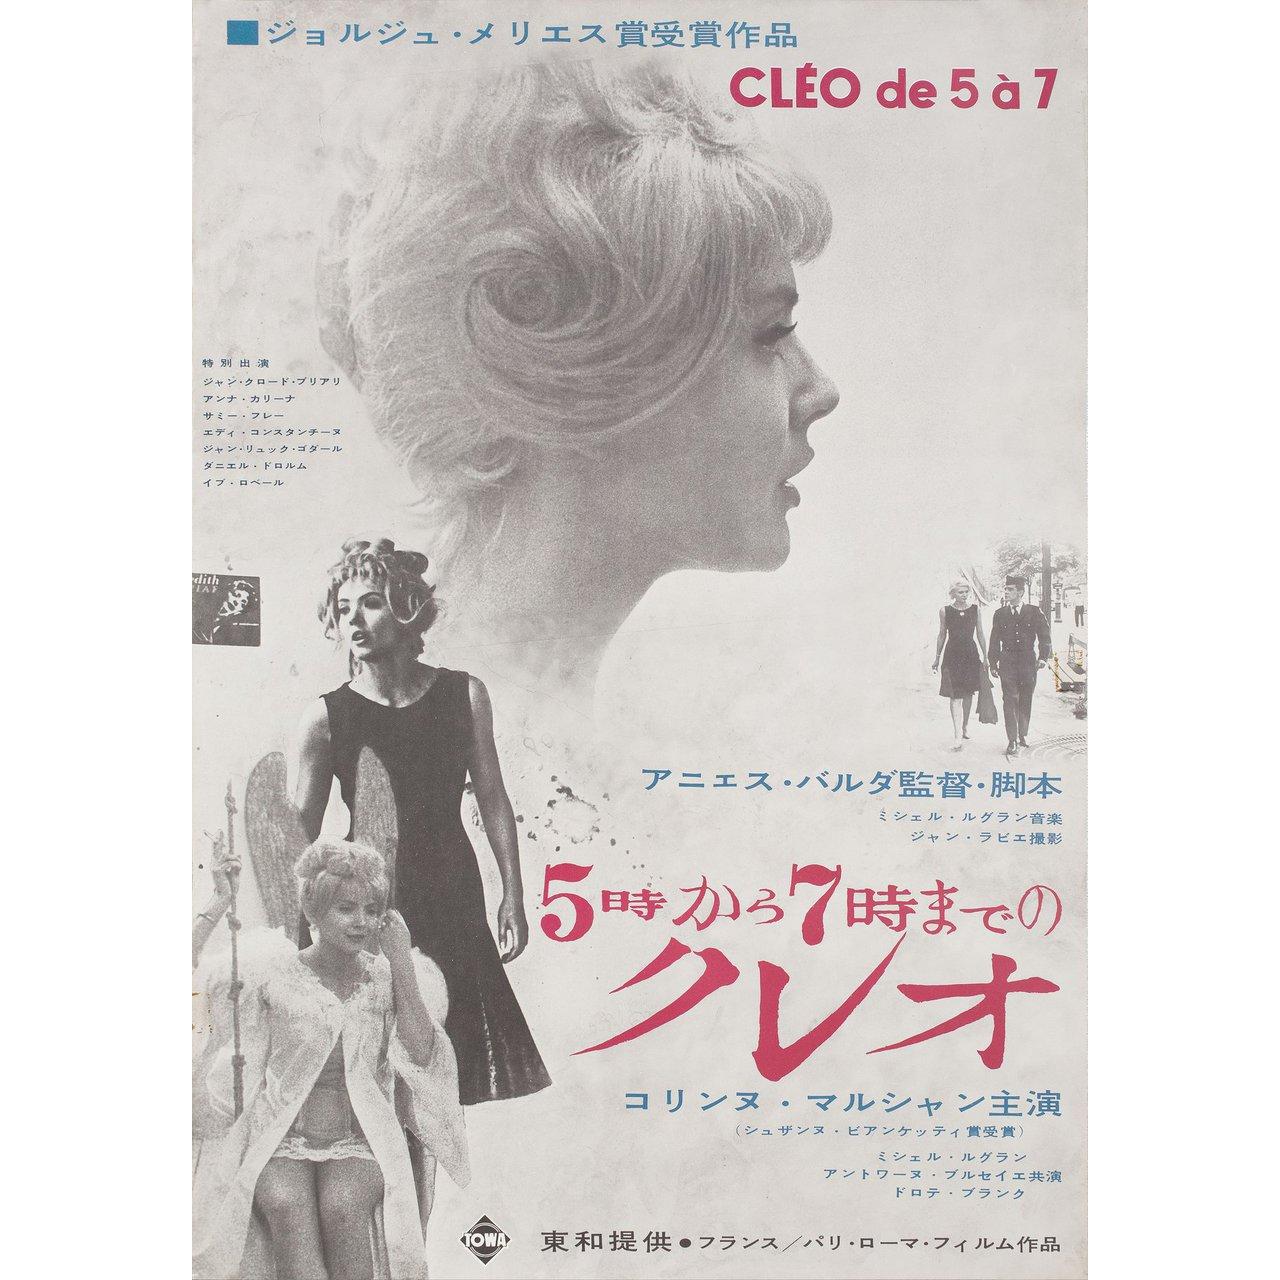 Original 1964 Japanese B2 poster for the first Japanese theatrical release of the film Cleo from 5 to 7 (Cleo de cinq a sept) directed by Agnes Varda with Corinne Marchand / Antoine Bourseiller / Dominique Davray / Dorothee Blanck. Very Good-Fine